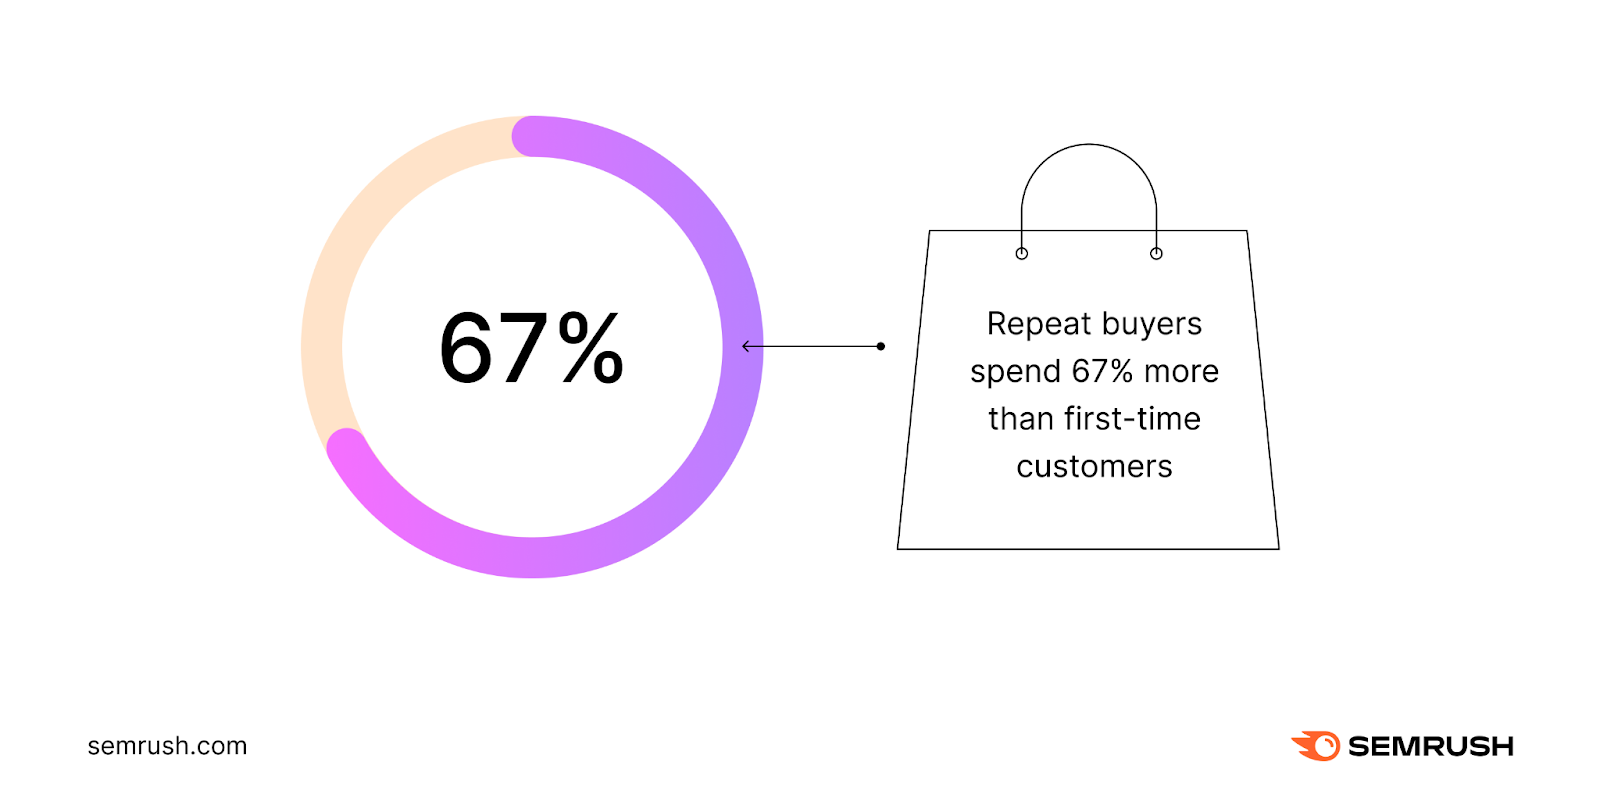 Repeat buyers spend 67% more than first-time customers